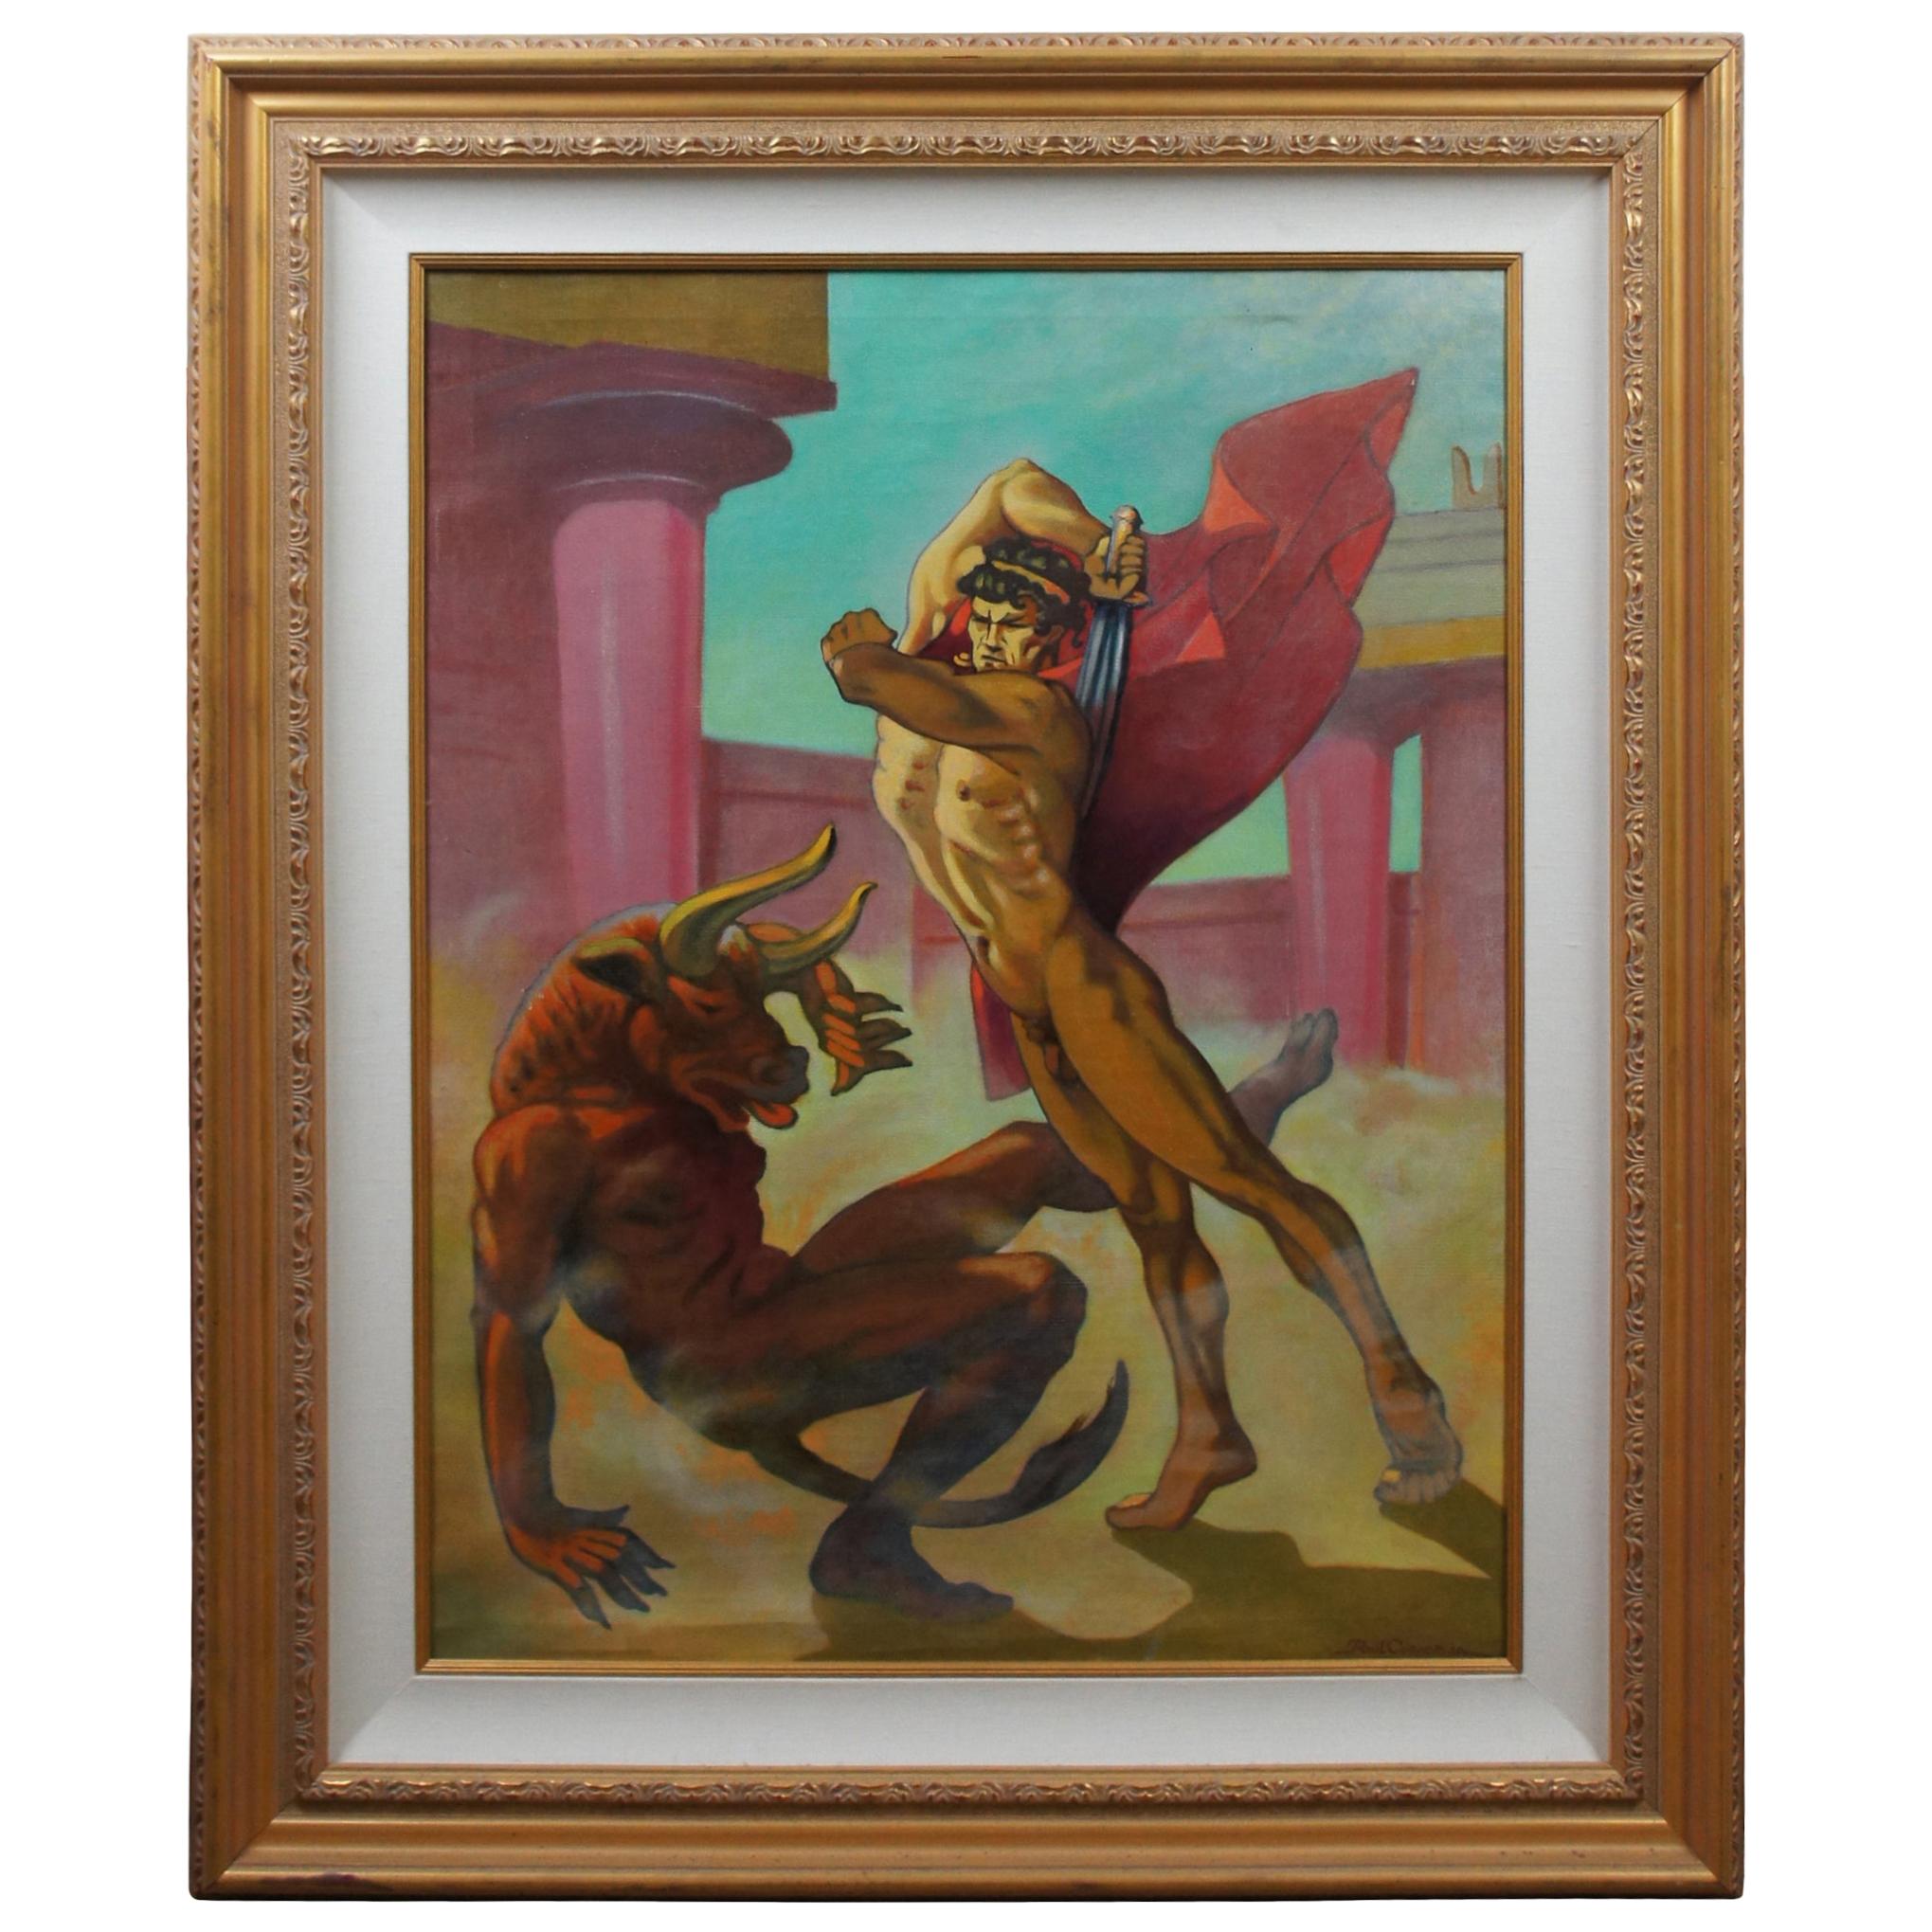 Paul Cooreman "Theseus Slaying Minotaur" Signed Oil Painting on Canvas Nude